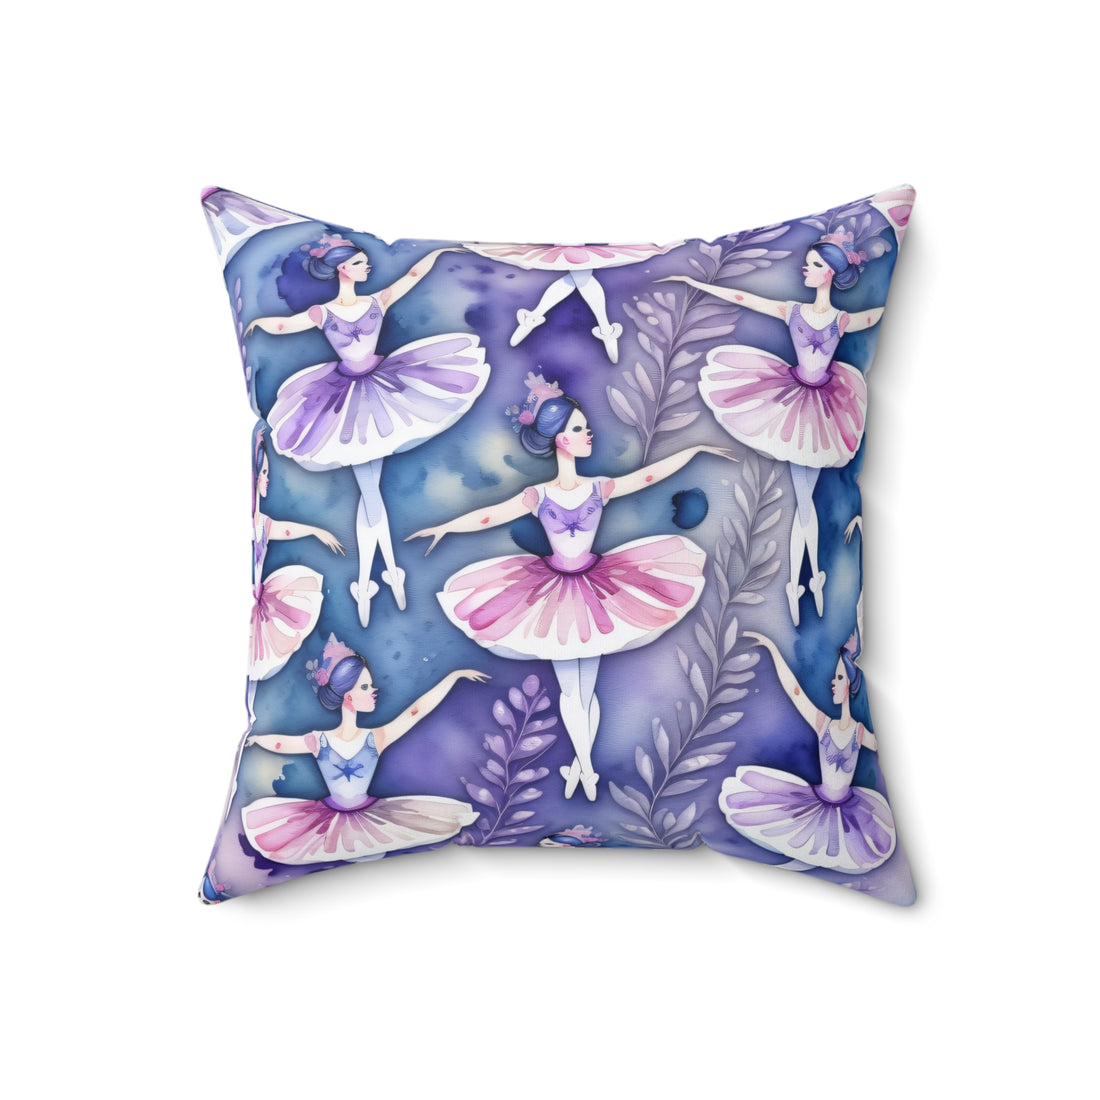 Sugar Plum Ballerina Inspired Pillows from Yumigara with Wisteria